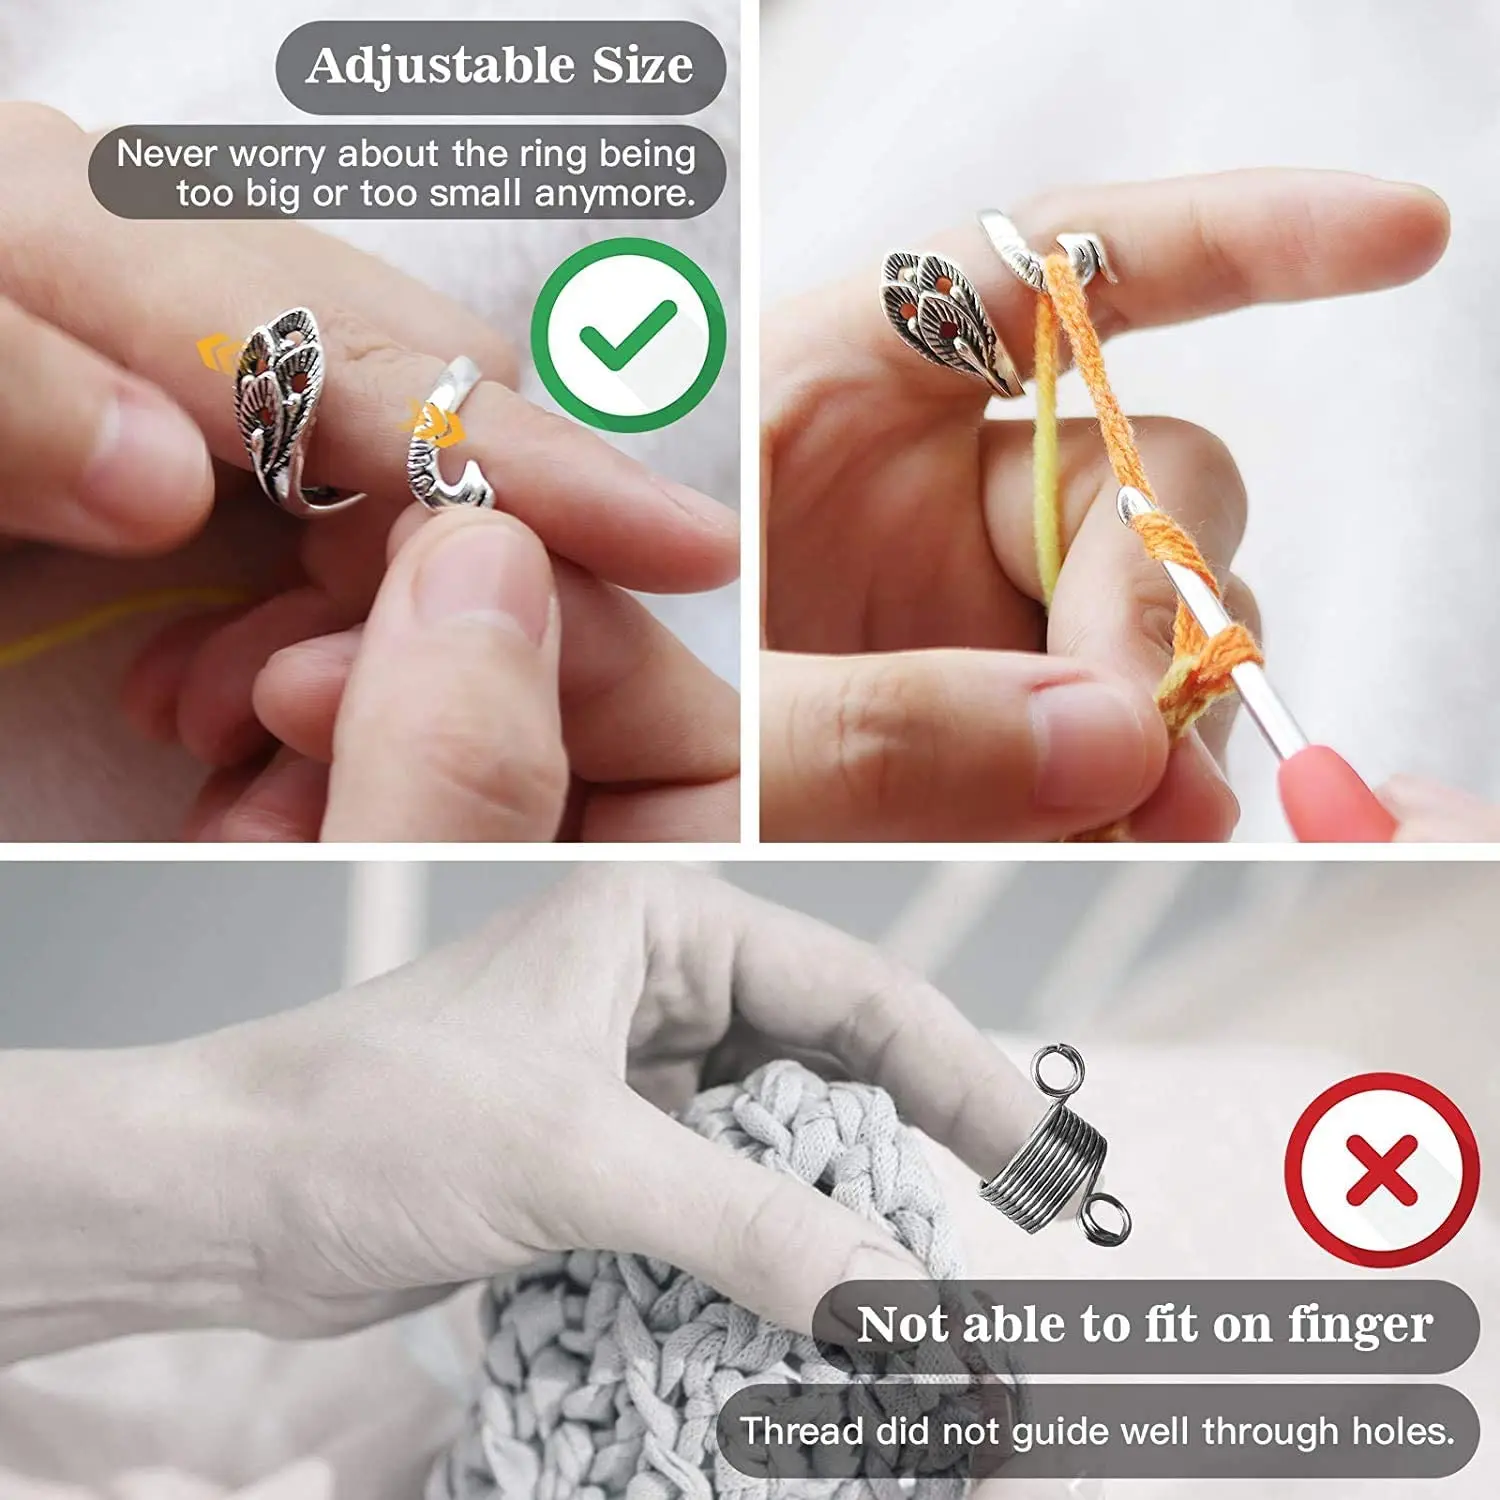 

Thai Silver Adjustable Peacock Knitting Loop Ring For Women Gold Silver 2 color Crochet Loop Ring Knitting Accessories